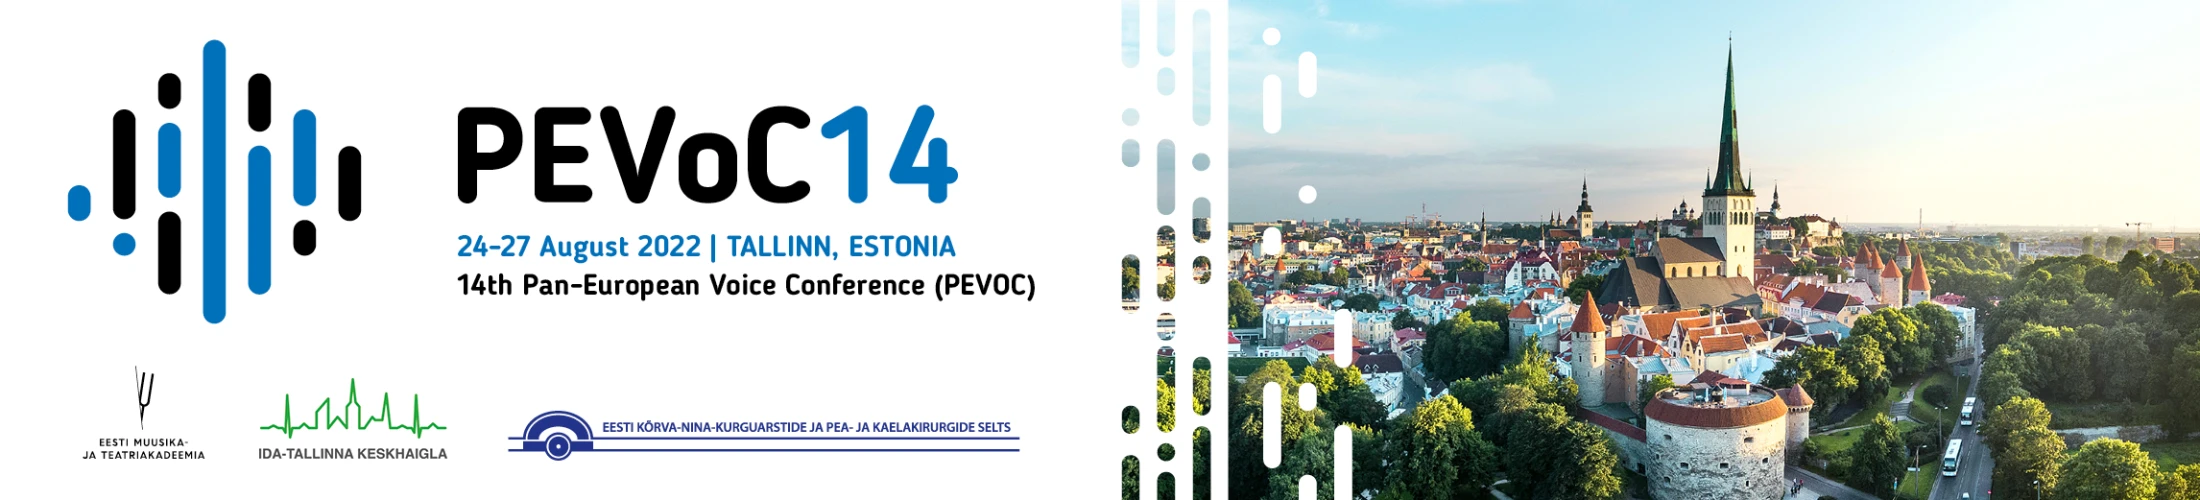 Banner of the PEVOC conference in Tallinn